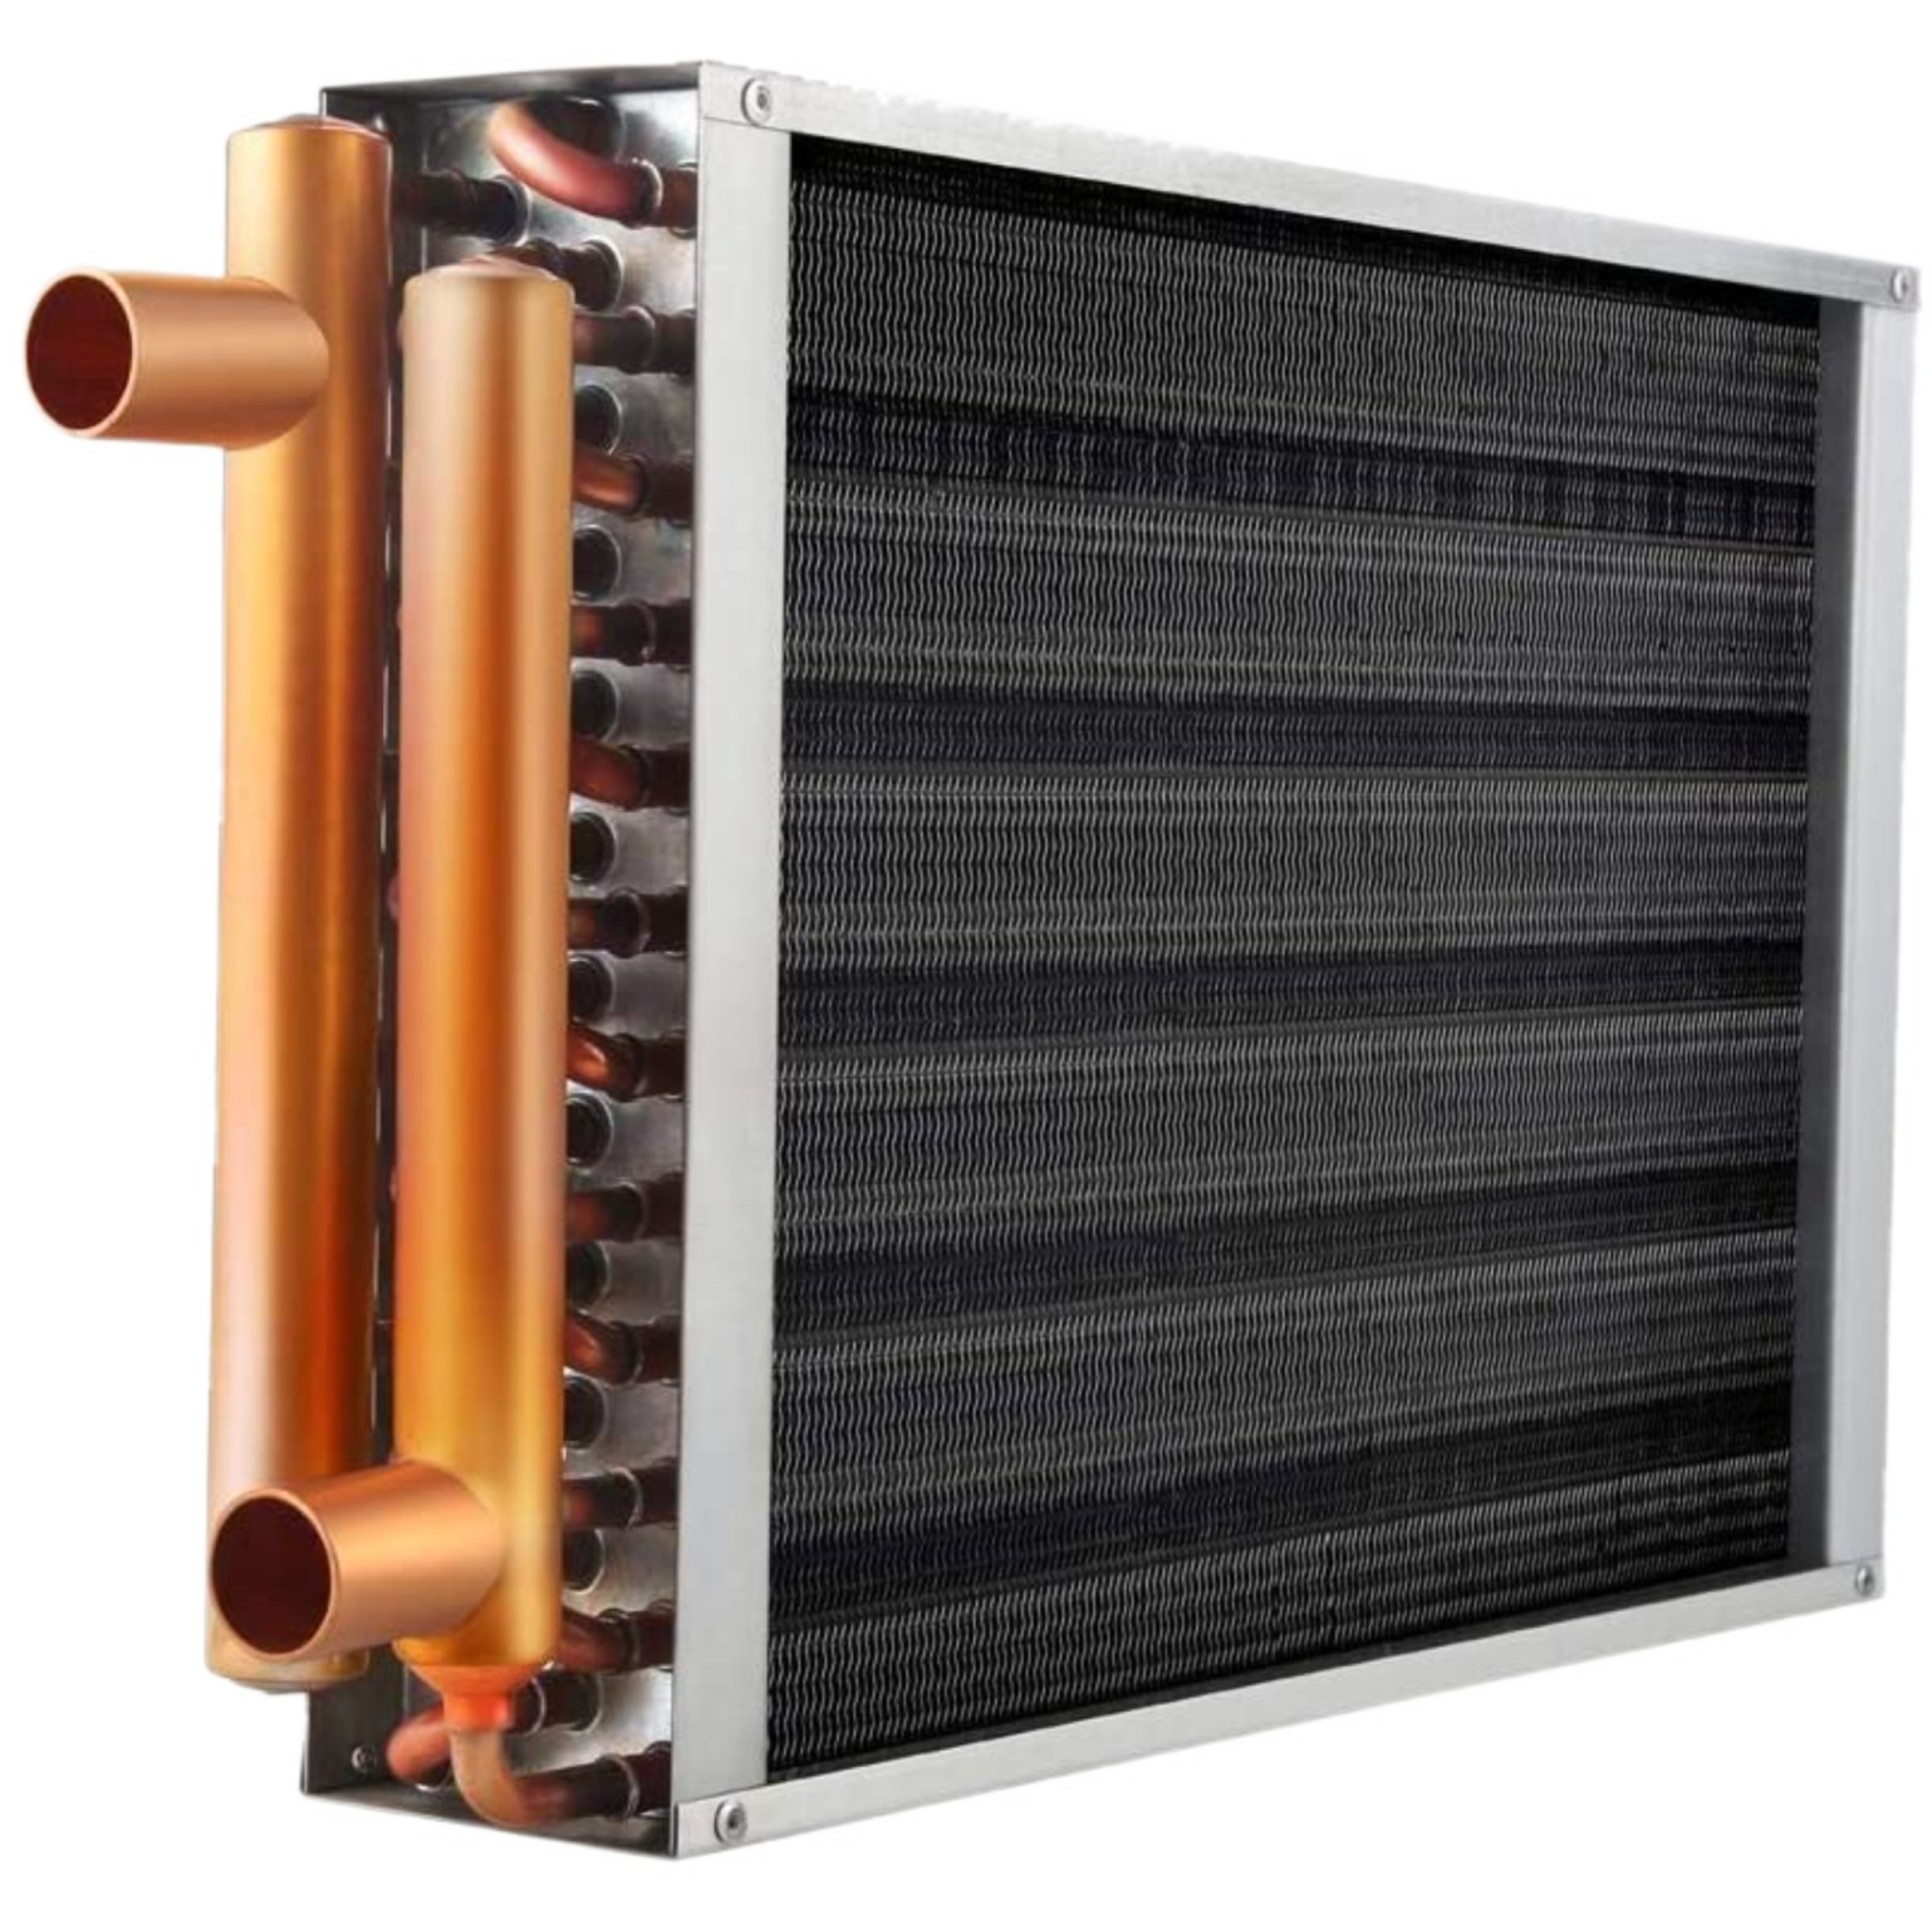 HTL 20 X 25 Hydronic Coil Air to Water Heat Exchanger 20GPM, PD 2.56 PSI, 163350 BTU/h to 190000 BTU/h